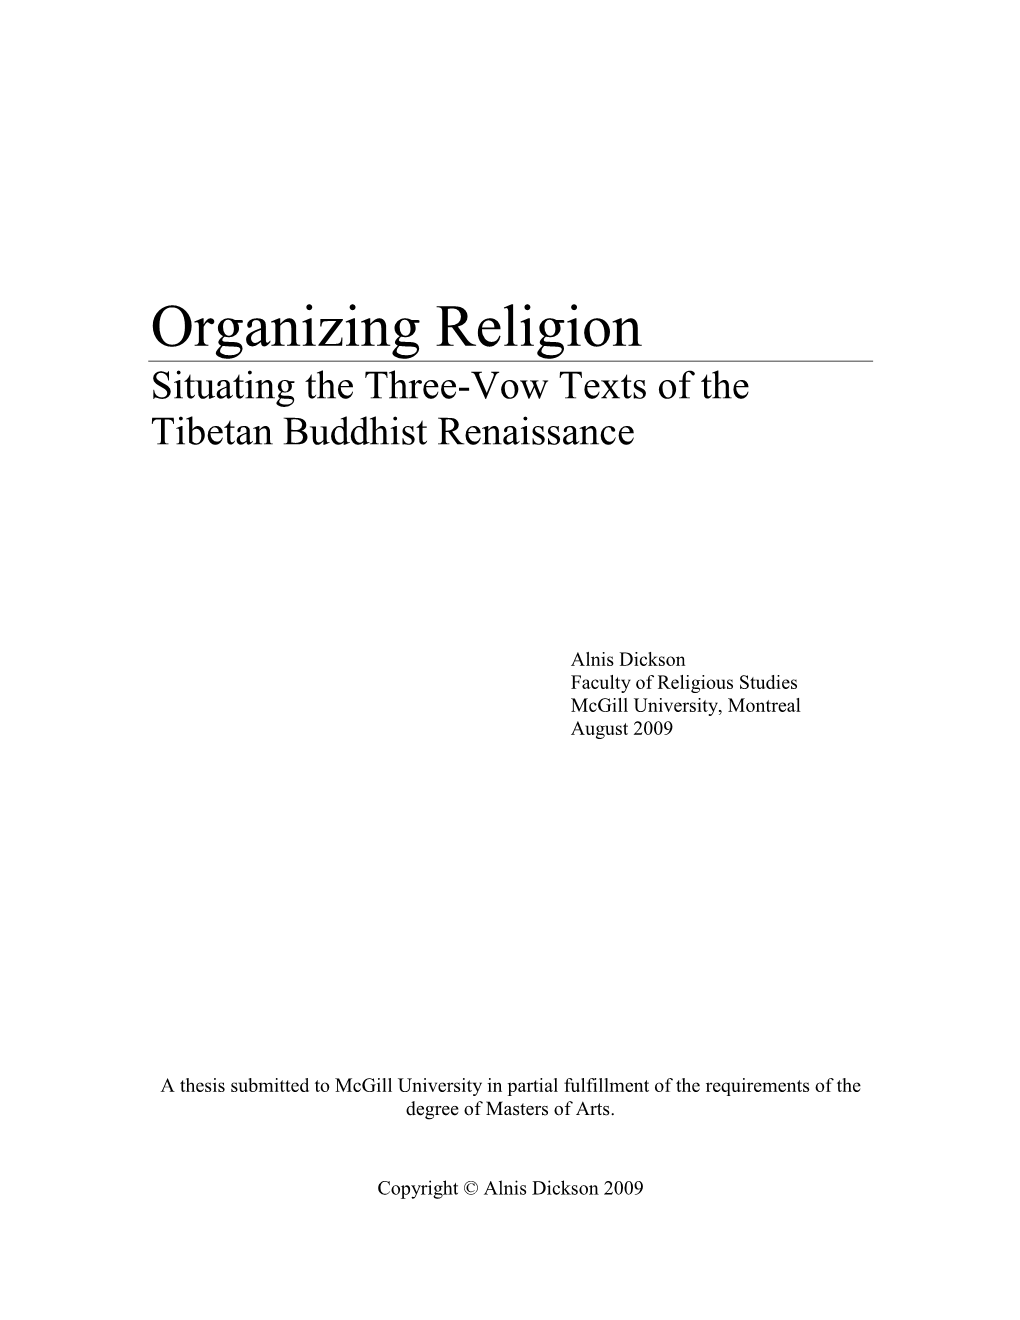 Organizing Religion Situating the Three-Vow Texts of the Tibetan Buddhist Renaissance